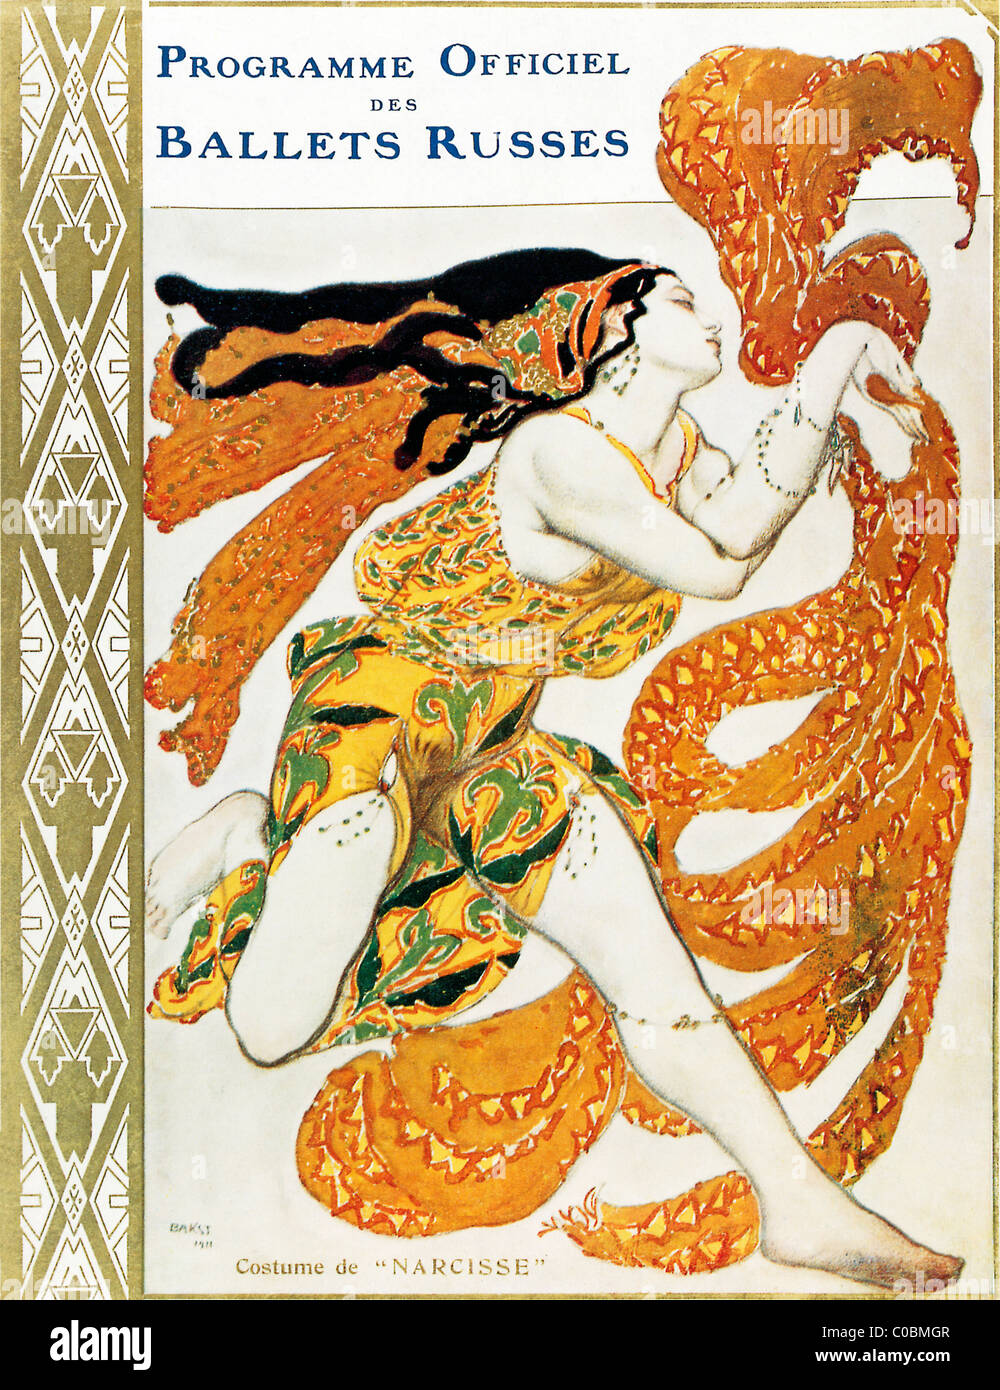 Leon Bakst, Ballets Russes, 1911 cover of the programme for Narcisse with the costume design for a Bacchante Stock Photo